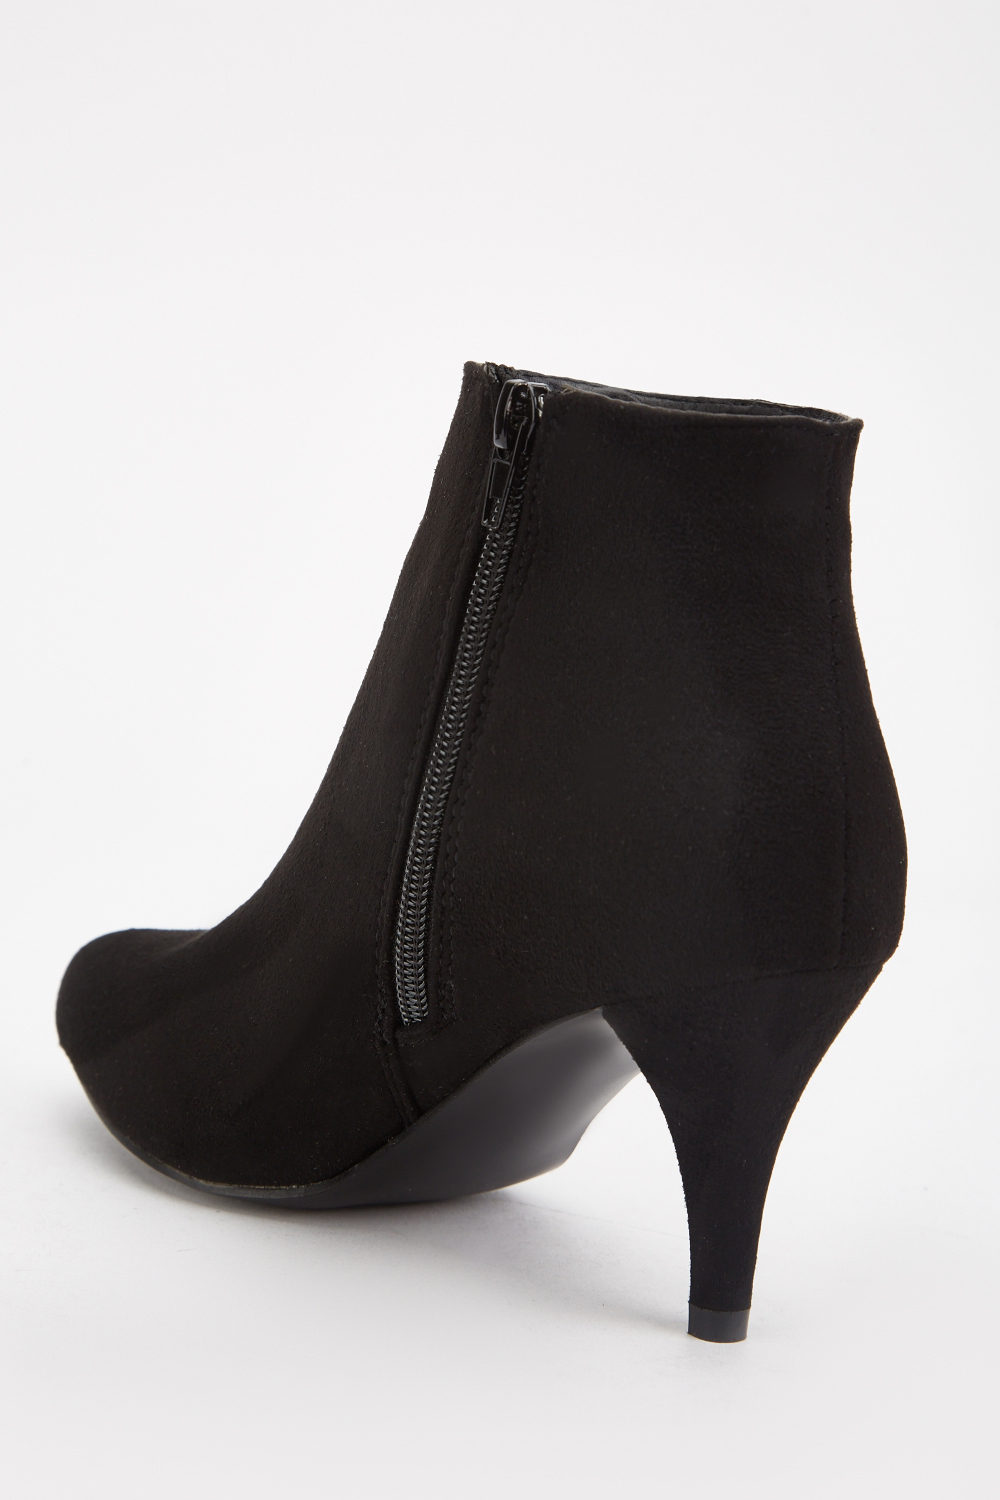 Spool Heel Ankle Boots - Just $6